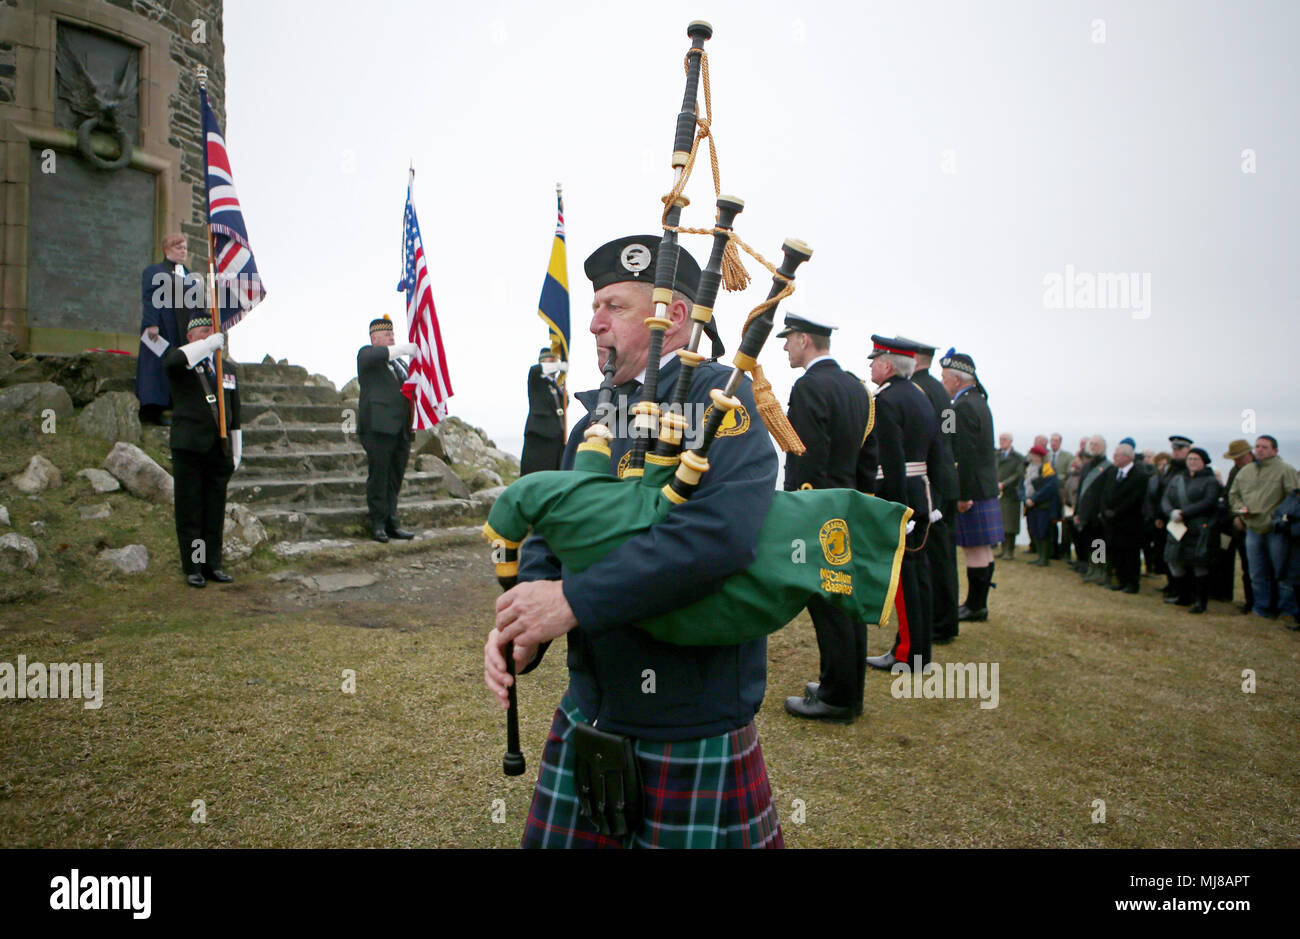 Pipe major Neil MacTaggart, from the Islay Community band, plays during a service at the American Moment at the Mull of Oa on Islay, to remember around 700 First World War soldiers who lost their lives in the sinking of two US ships off the coast of the small Scottish island. Stock Photo